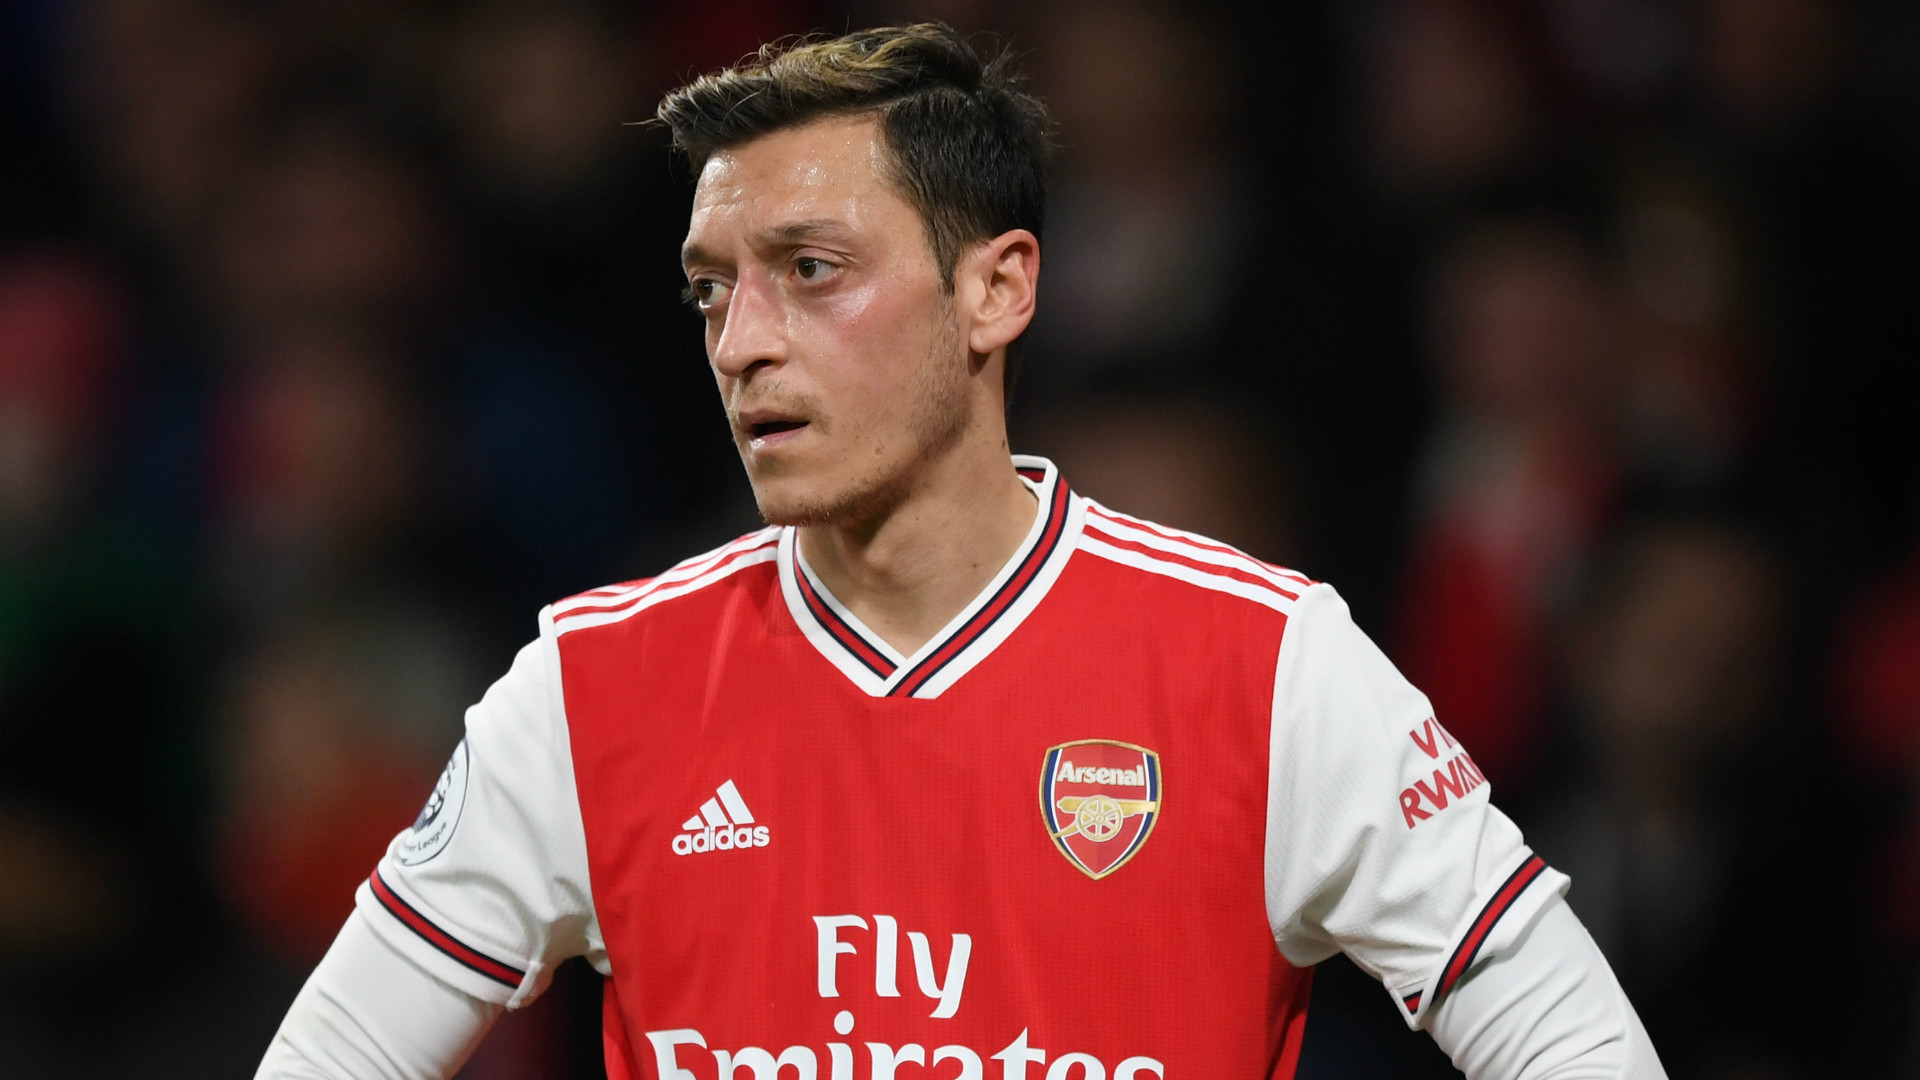 Arsenal vs Man City removed from Chinese TV over Ozil comments